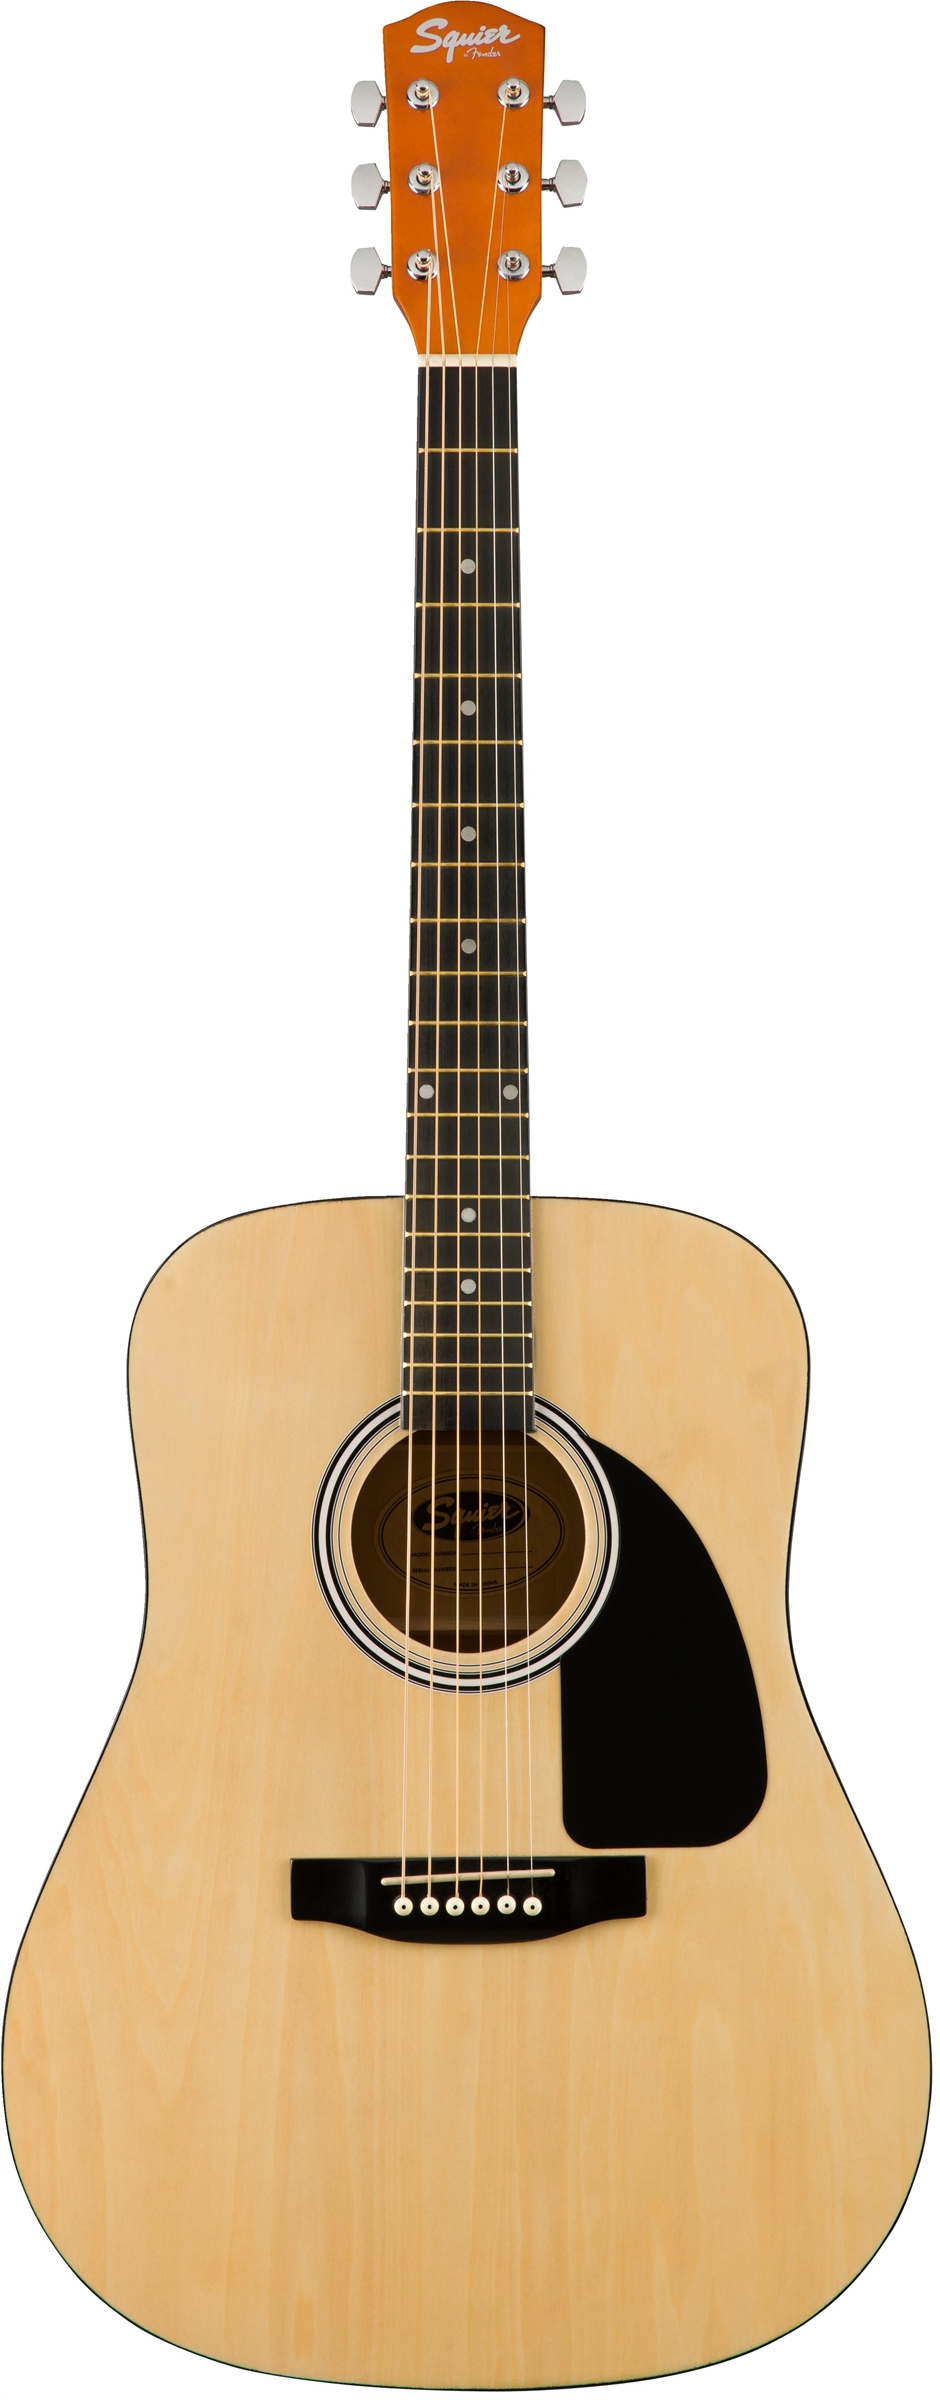   /   SQUIER by FENDER SA-150 DREADNOUGHT NAT